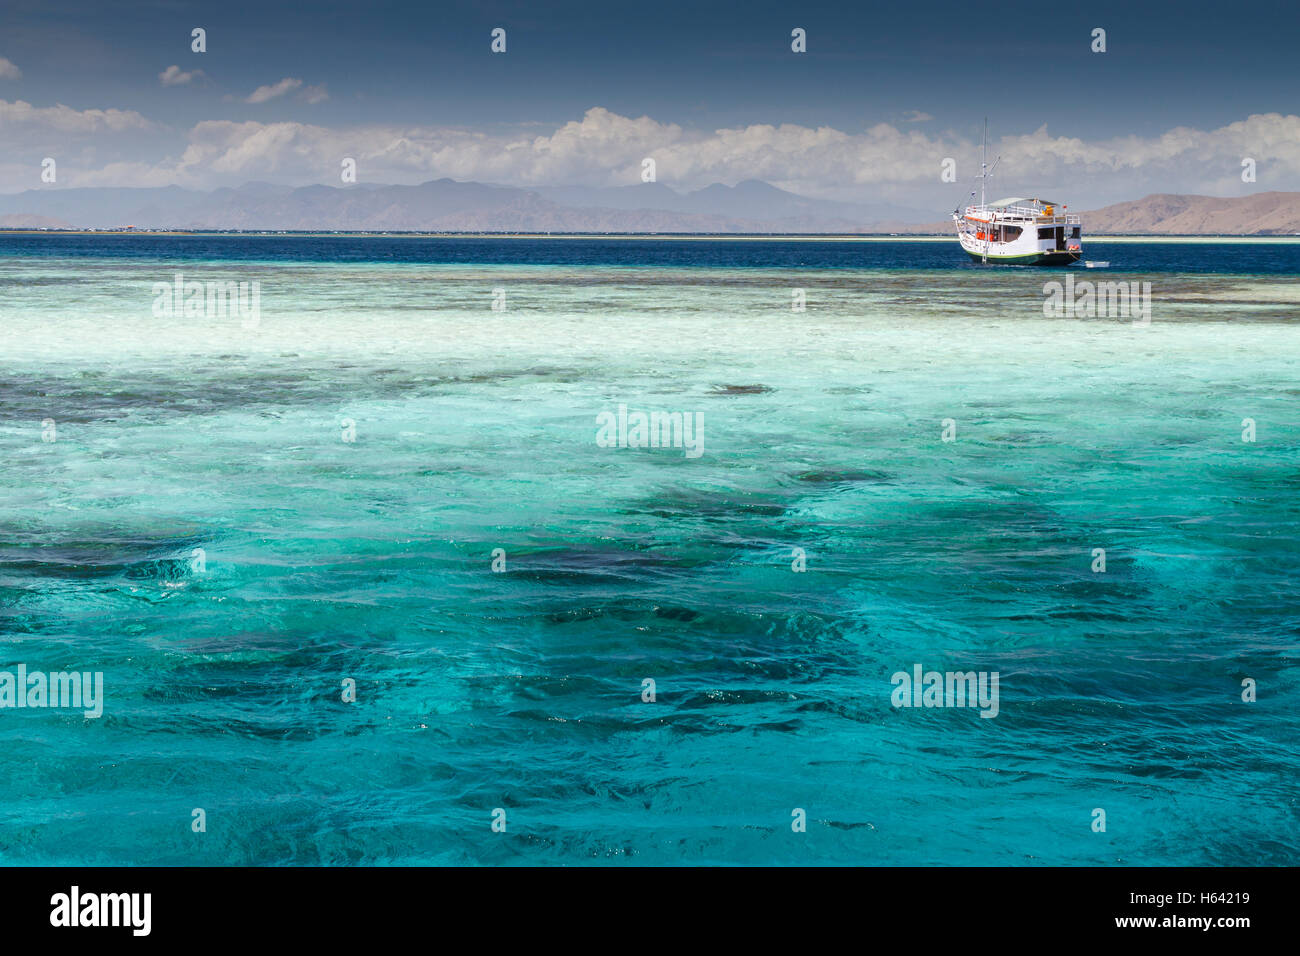 Boat and coral reef area in tropic. Stock Photo